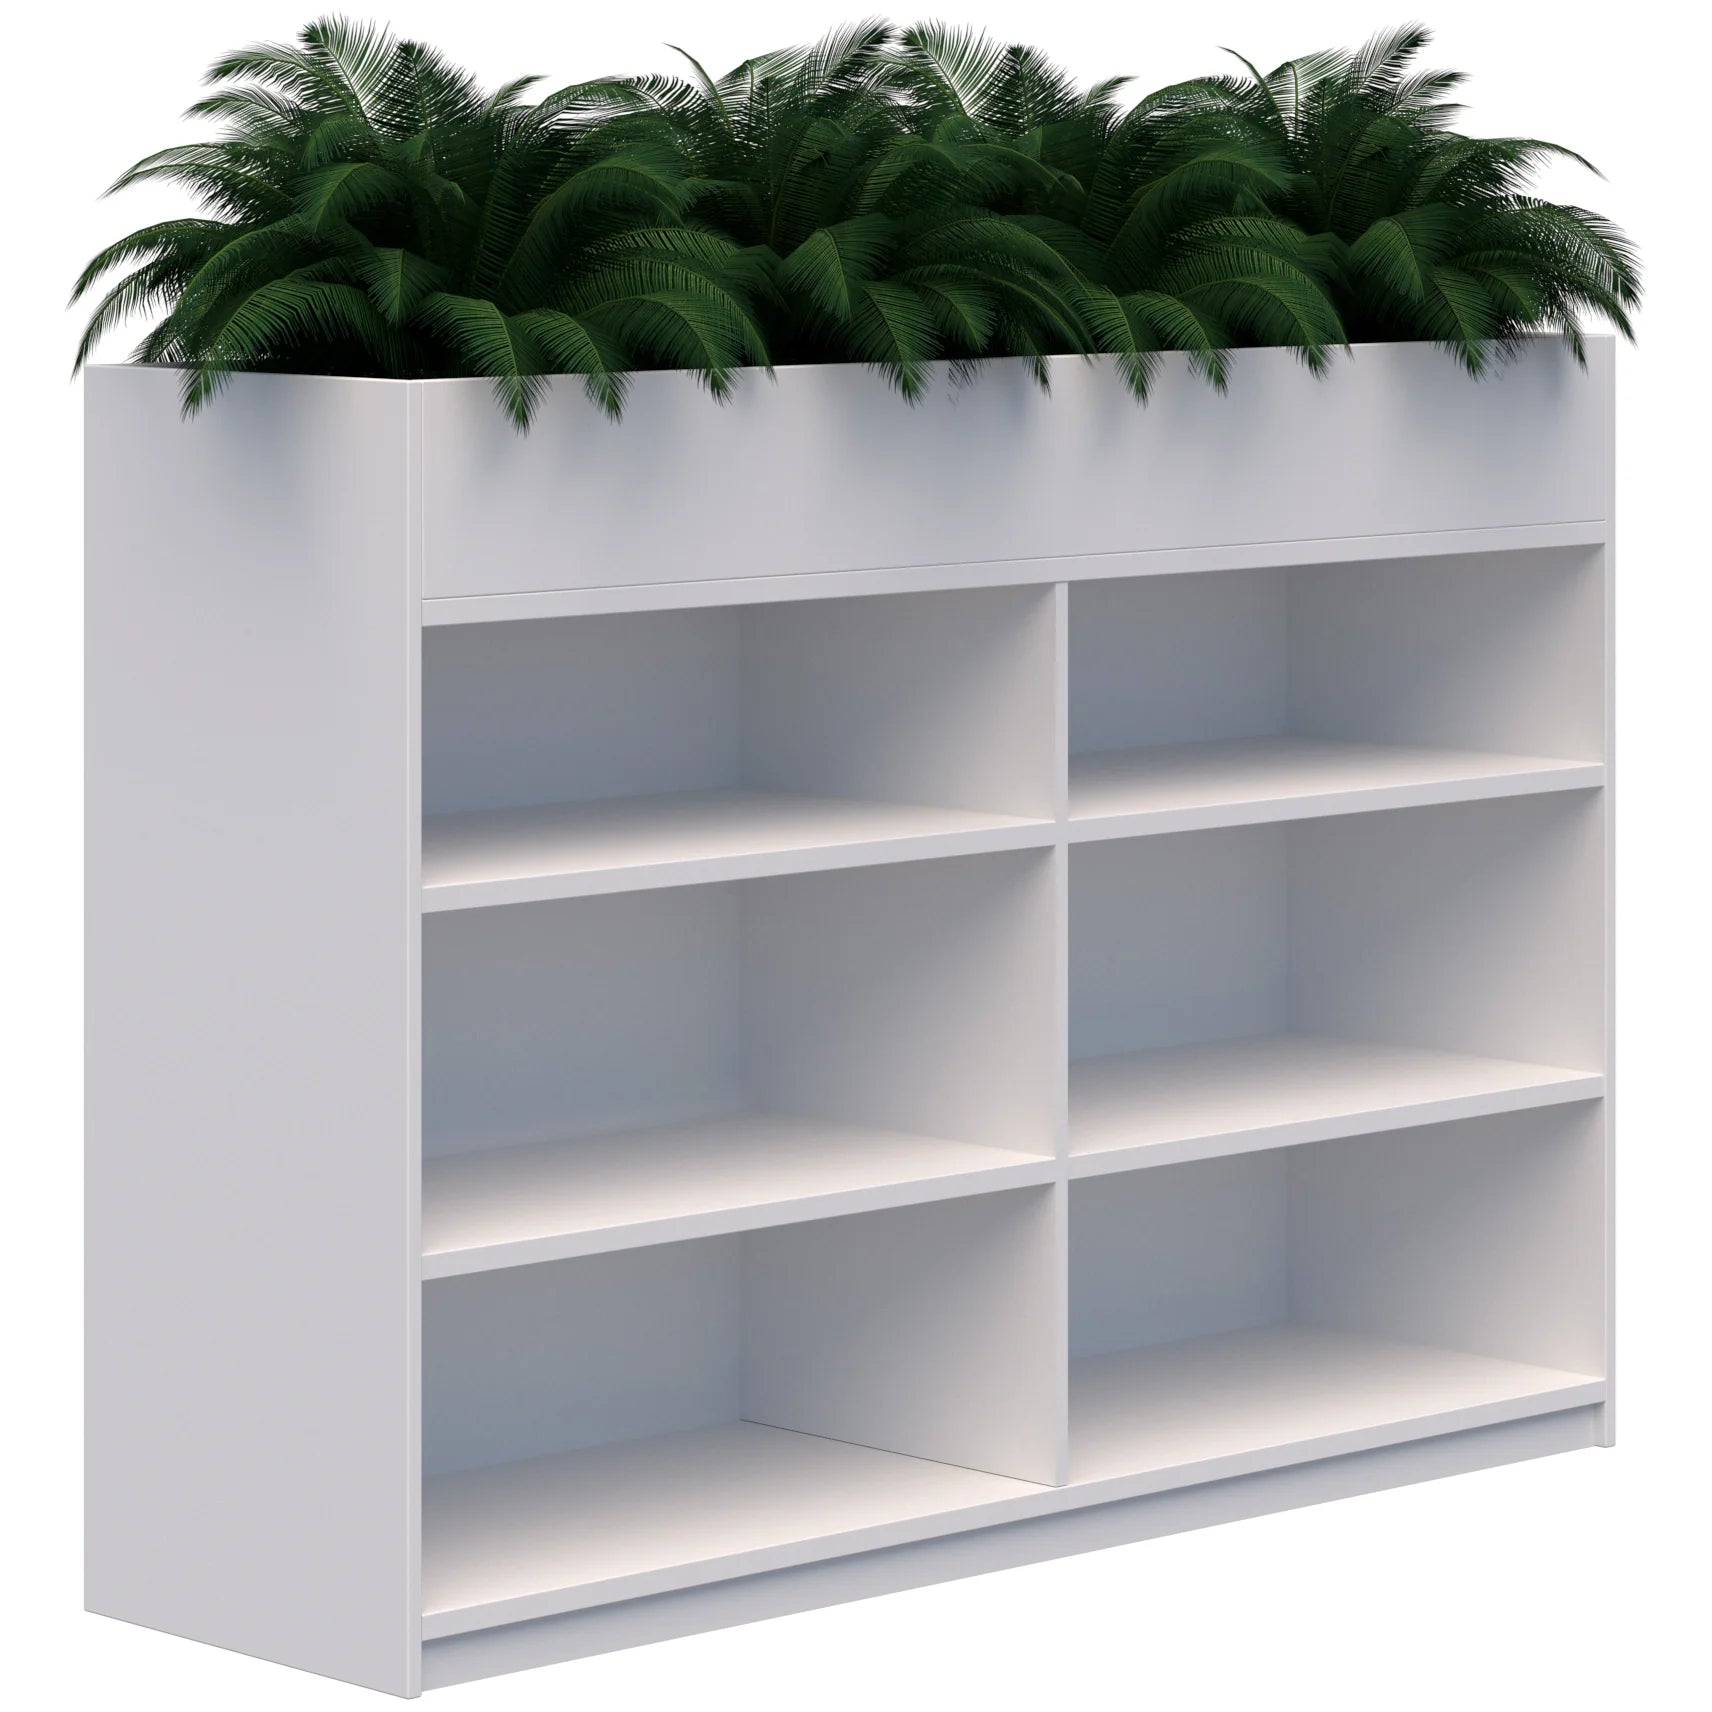 Dual three tier bookcase with built in planter box on top in snow velvet white colour.